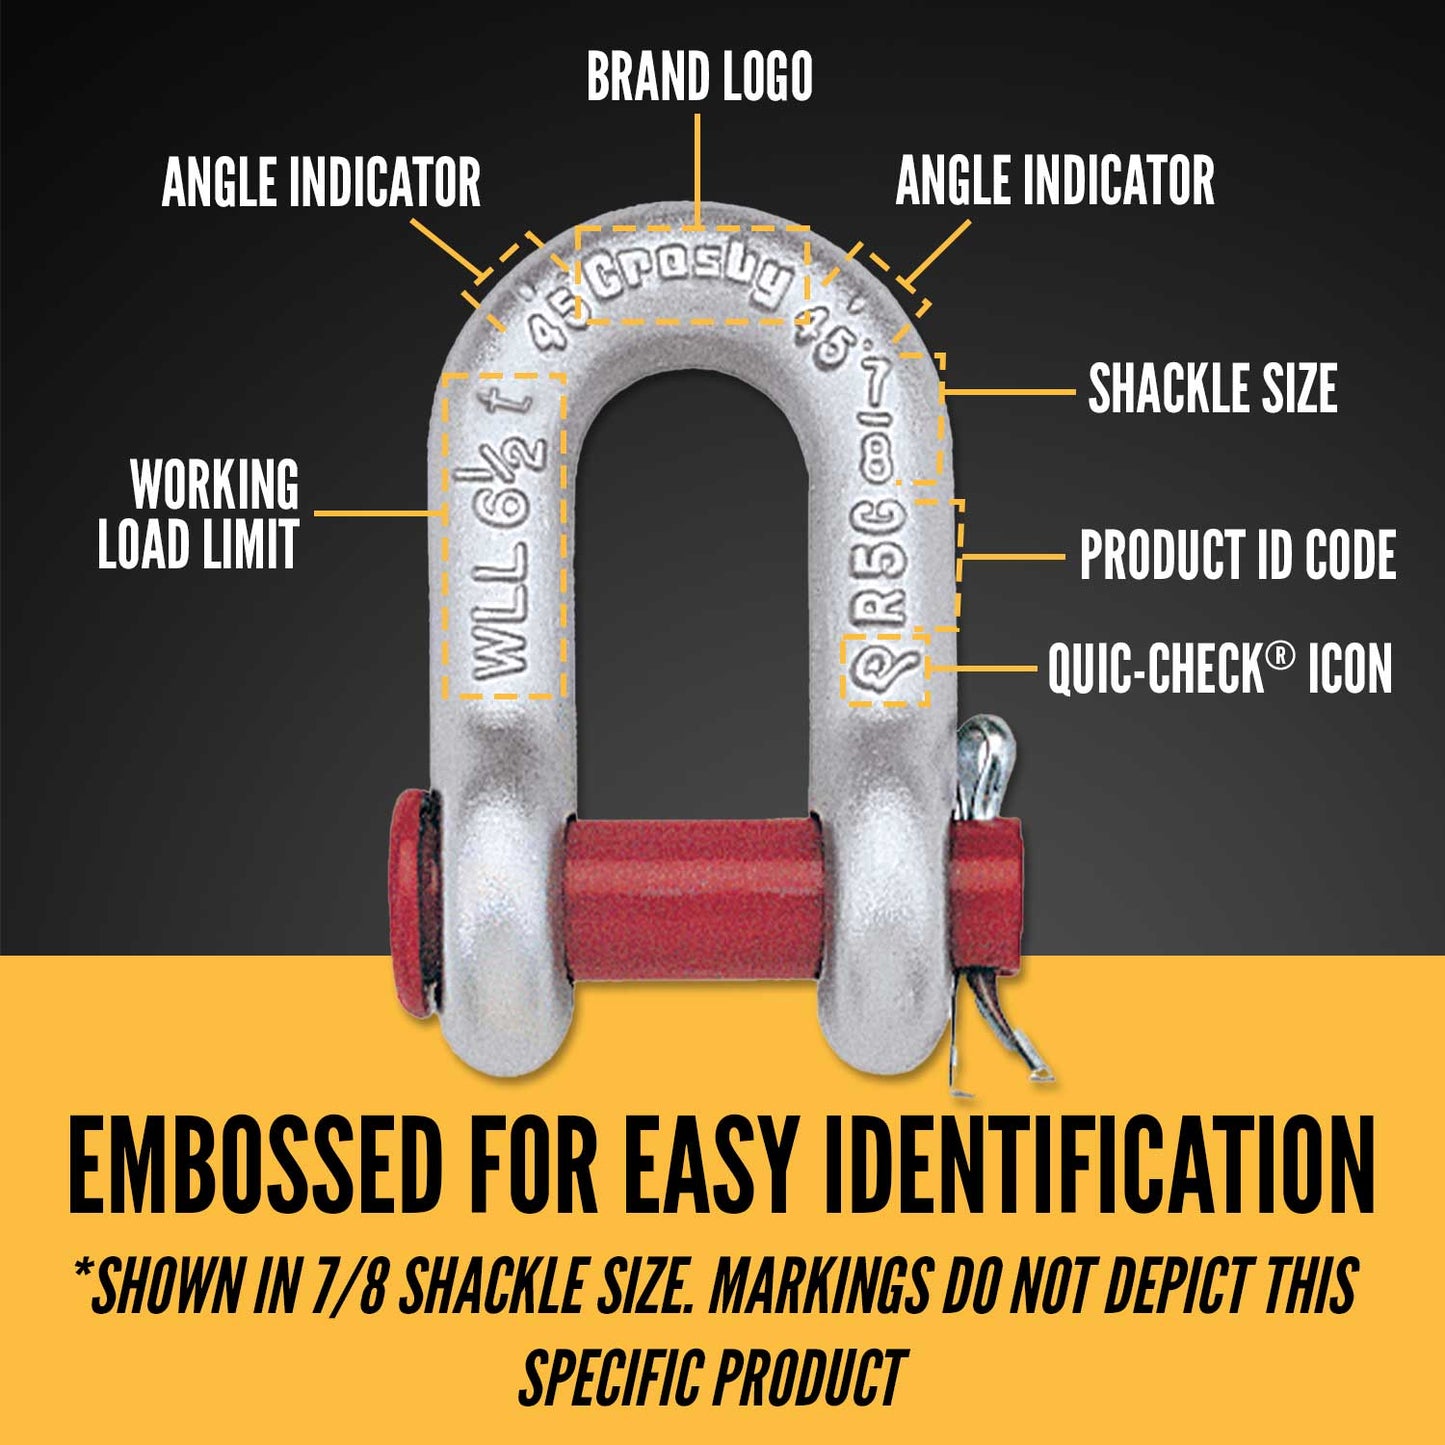 1/4" Crosby® Round Pin Chain Shackle | G-215 - 0.5 Ton embossed for easy identification